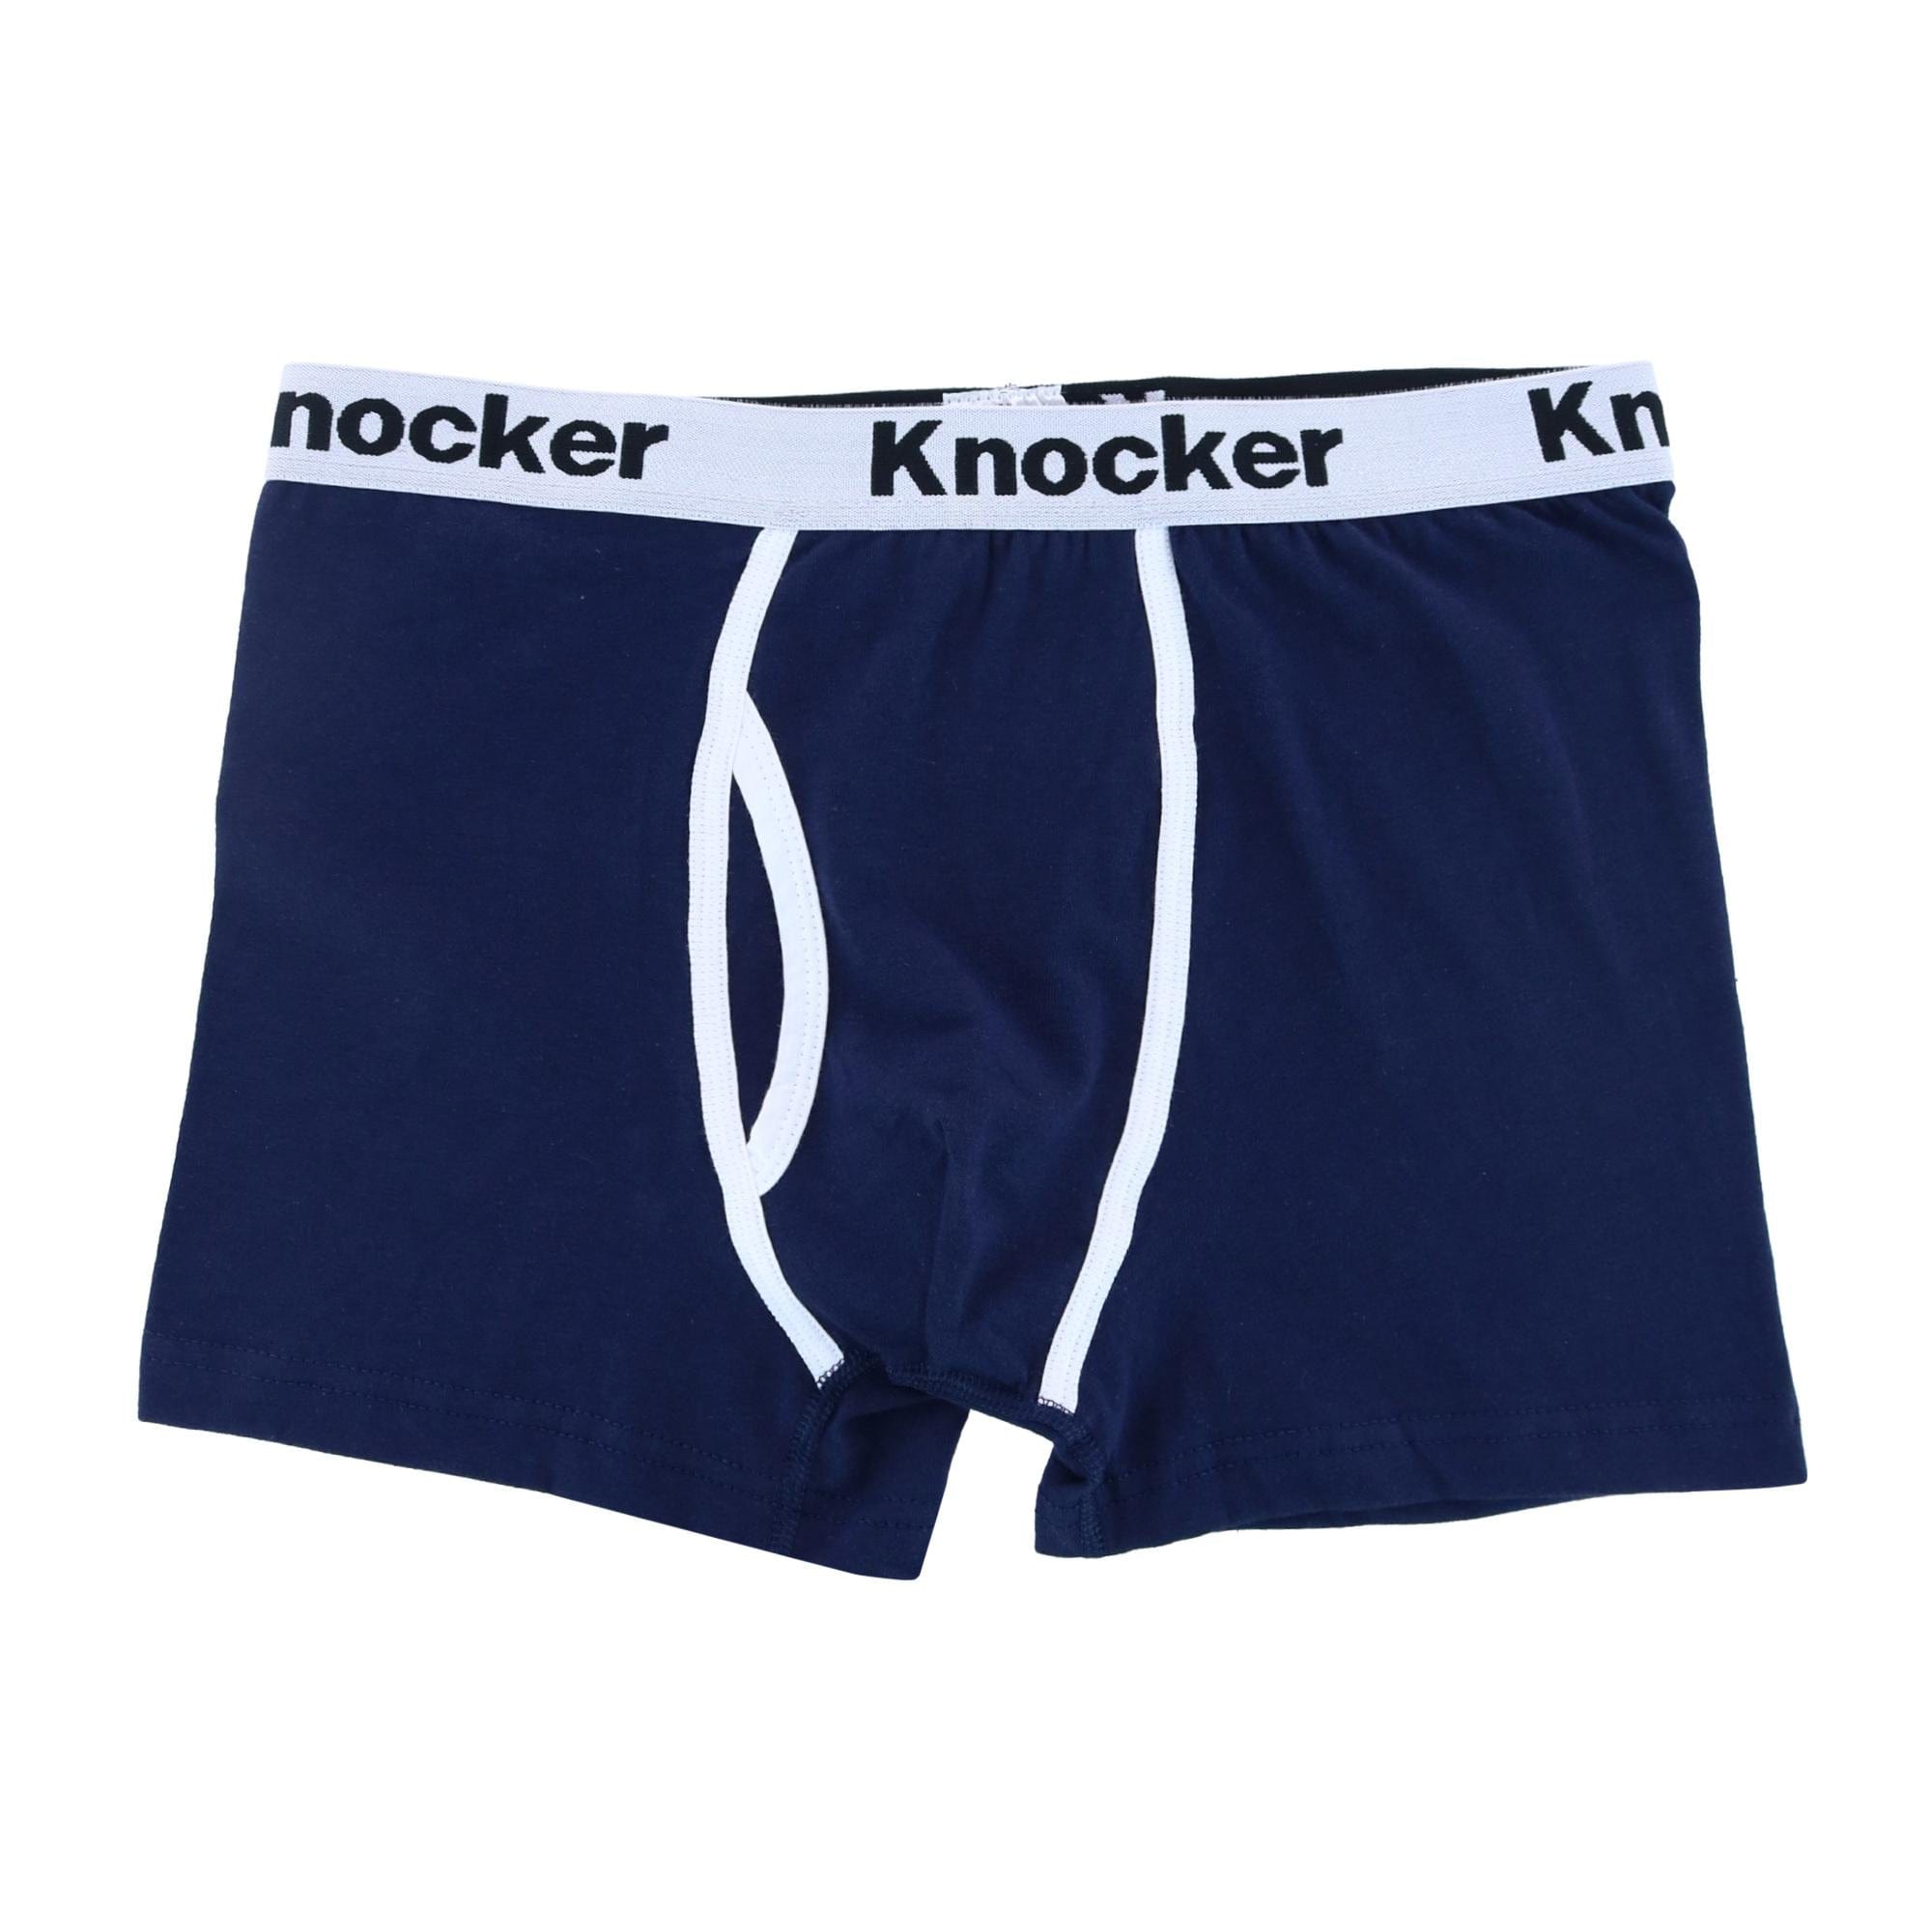 Men's Extended Size Boxer Briefs with Contrasting Trim by Knocker